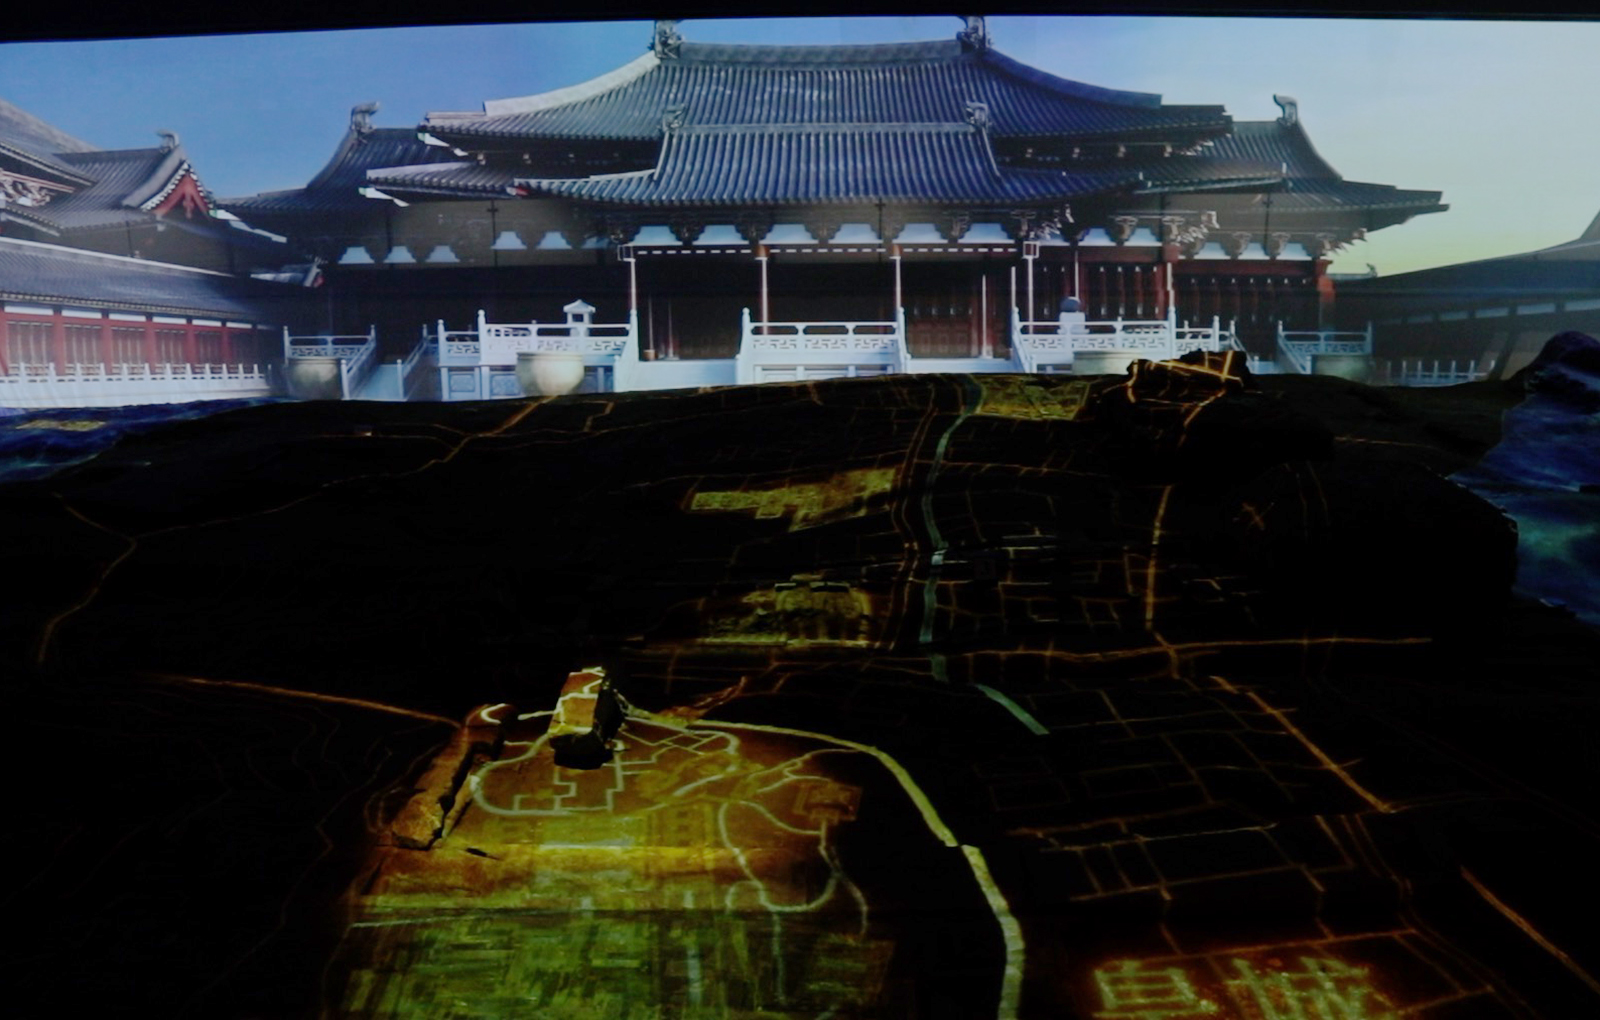 Digital installations replicate the original buildings of the Deshou Palace alongside the architectural remnants uncovered at the Deshou Palace Ruins Museum in Hangzhou, Zhejiang Province. /CGTN